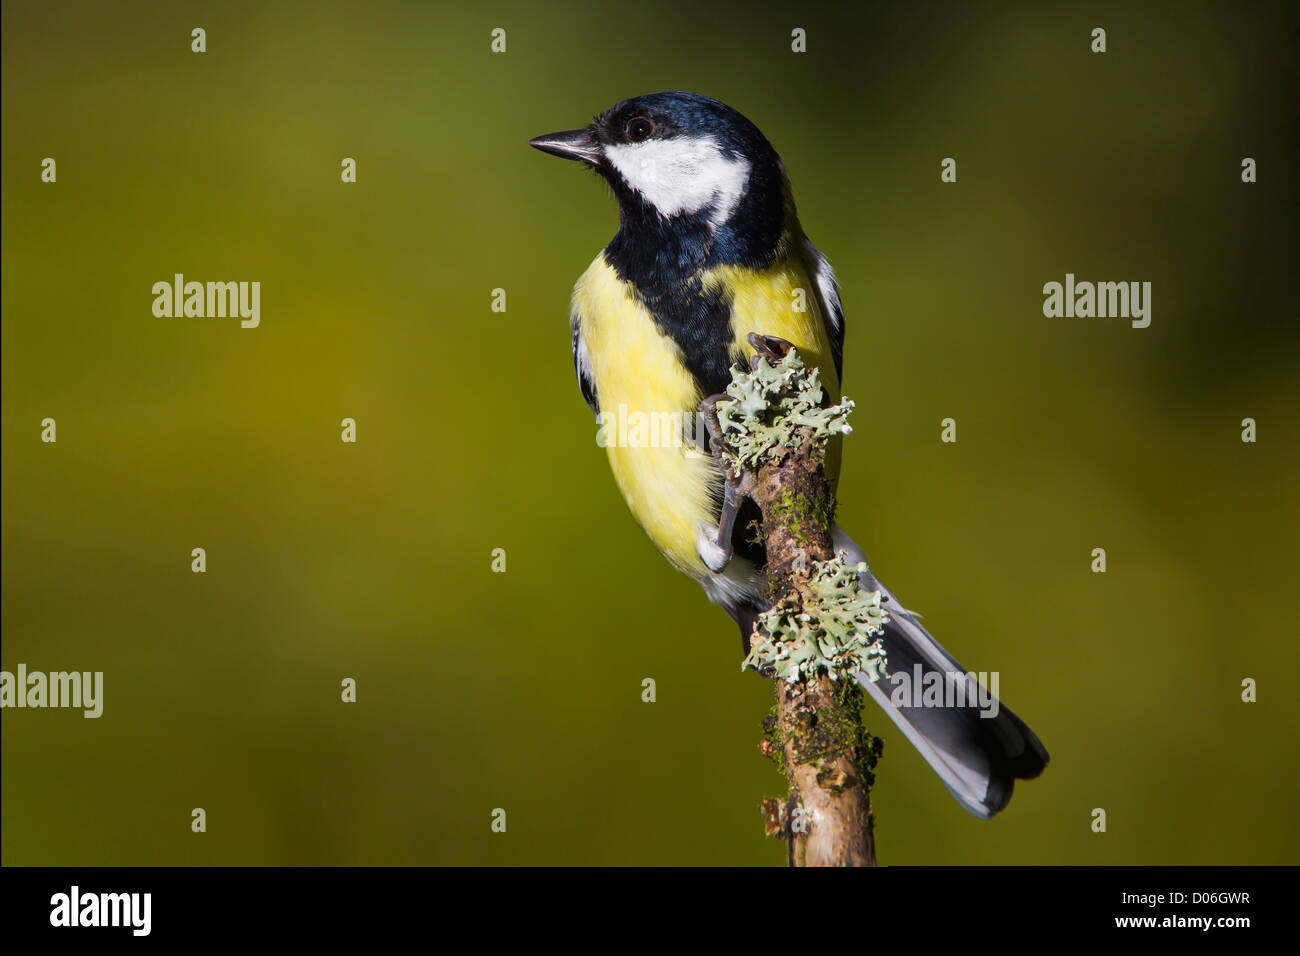 GREAT TIT ON A LICHEN COVERED BRANCH Stock Photo